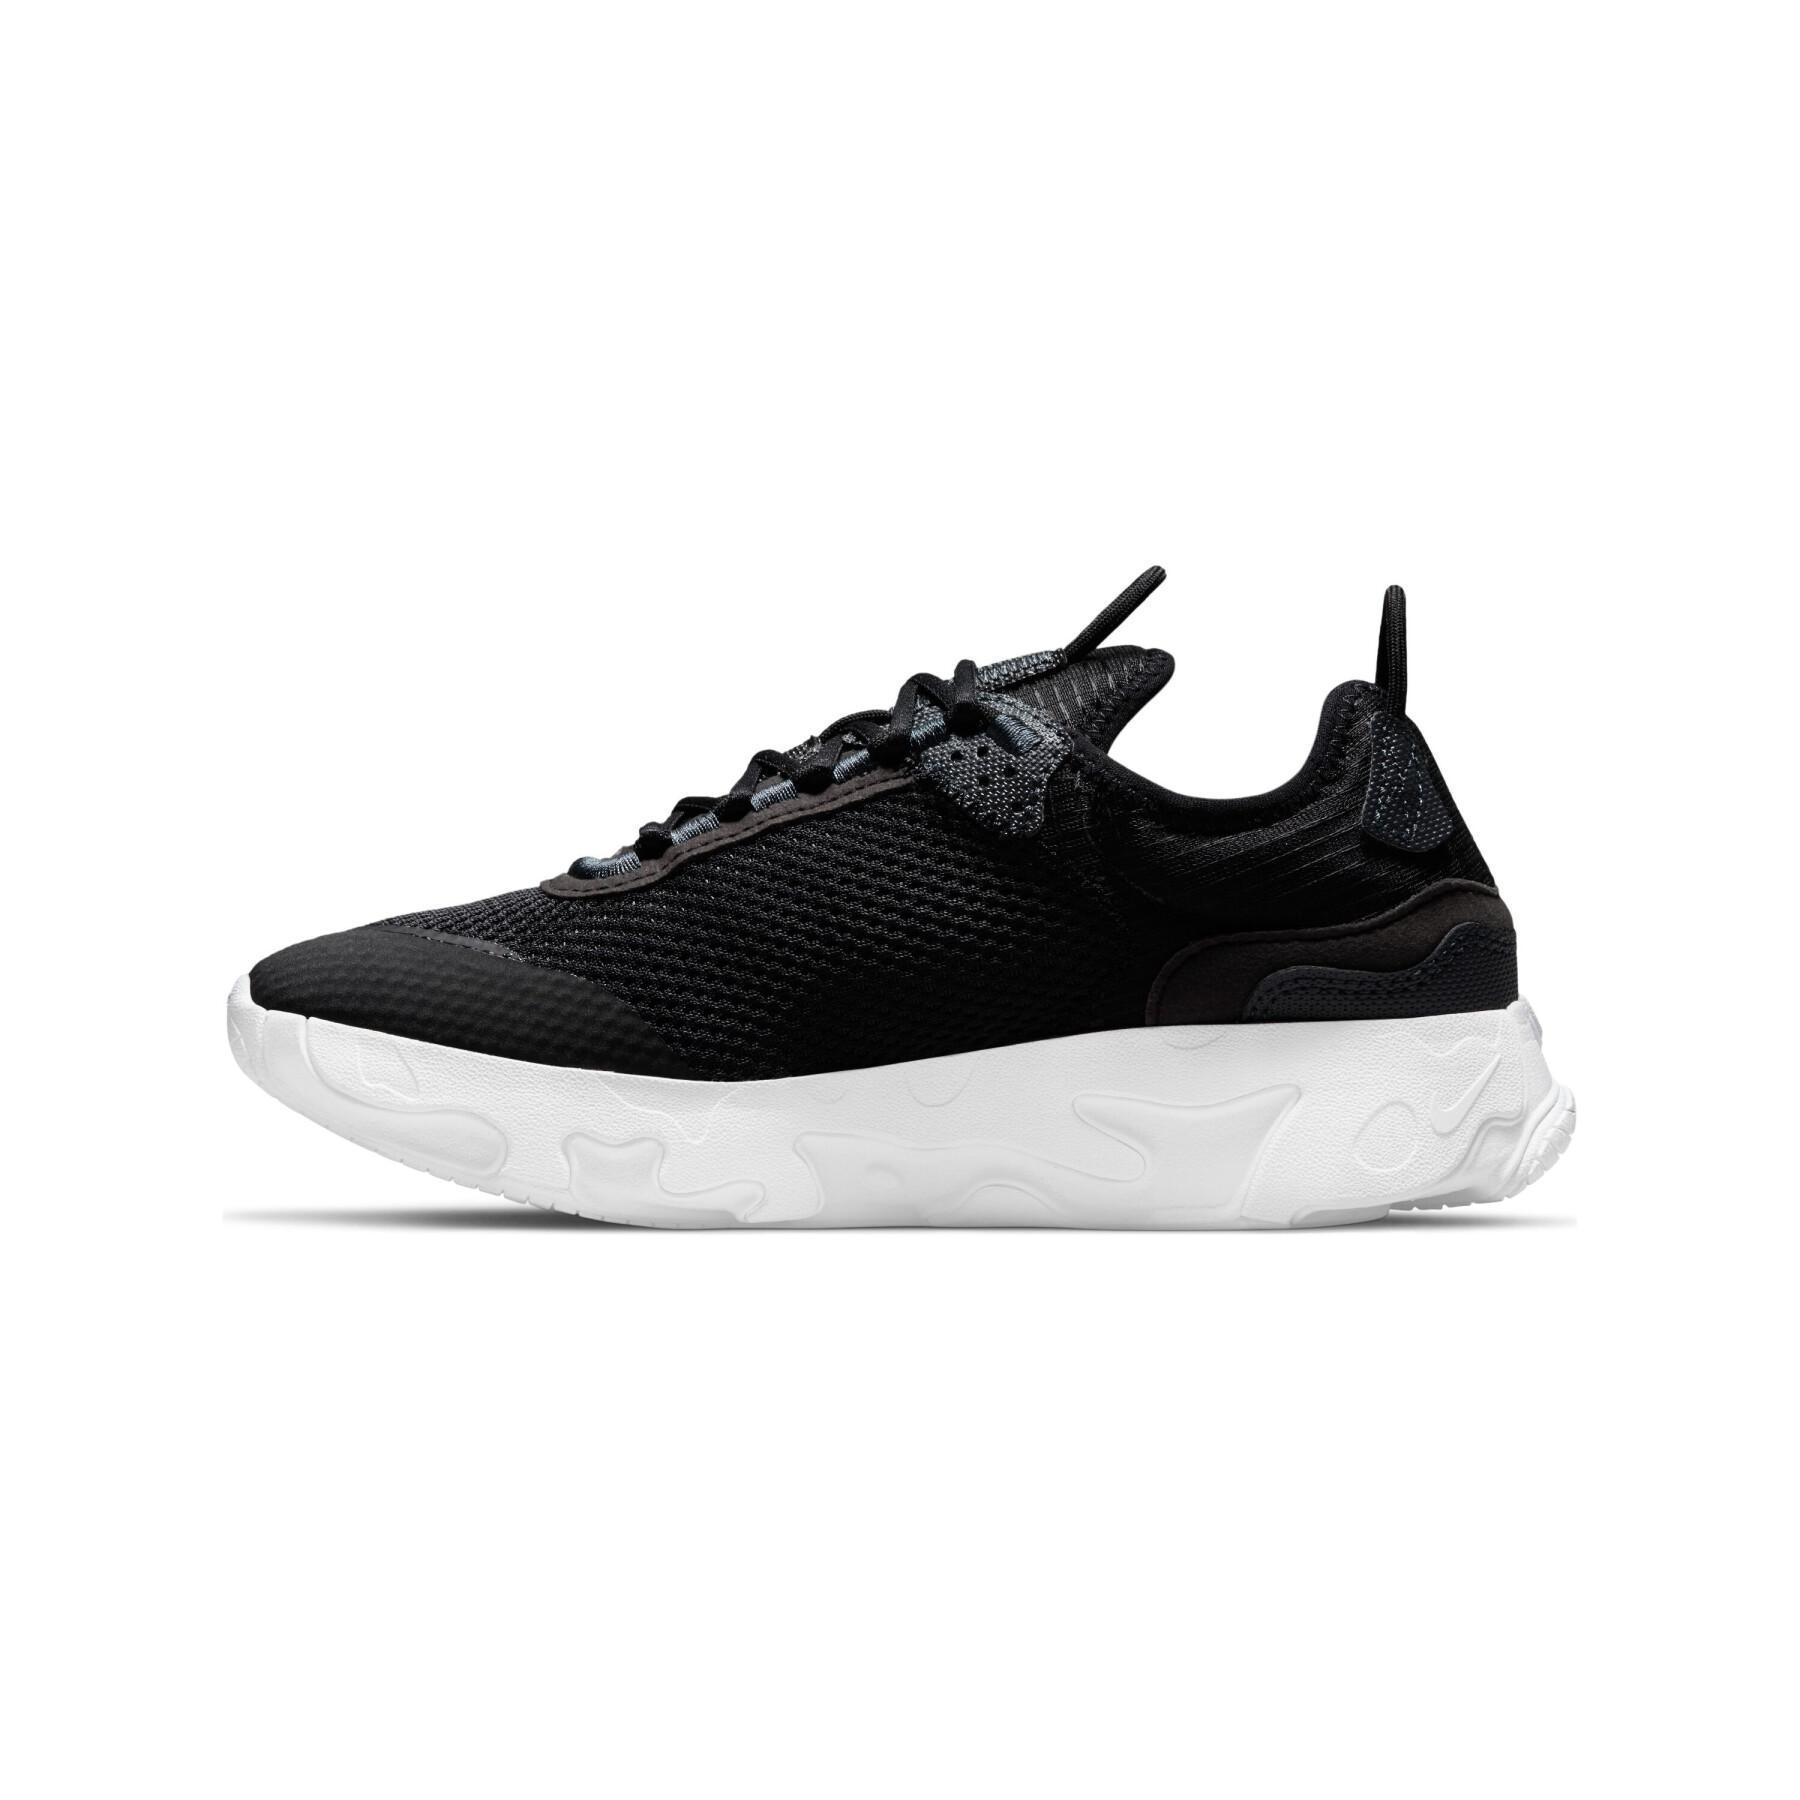 Chaussures enfant Nike React Live